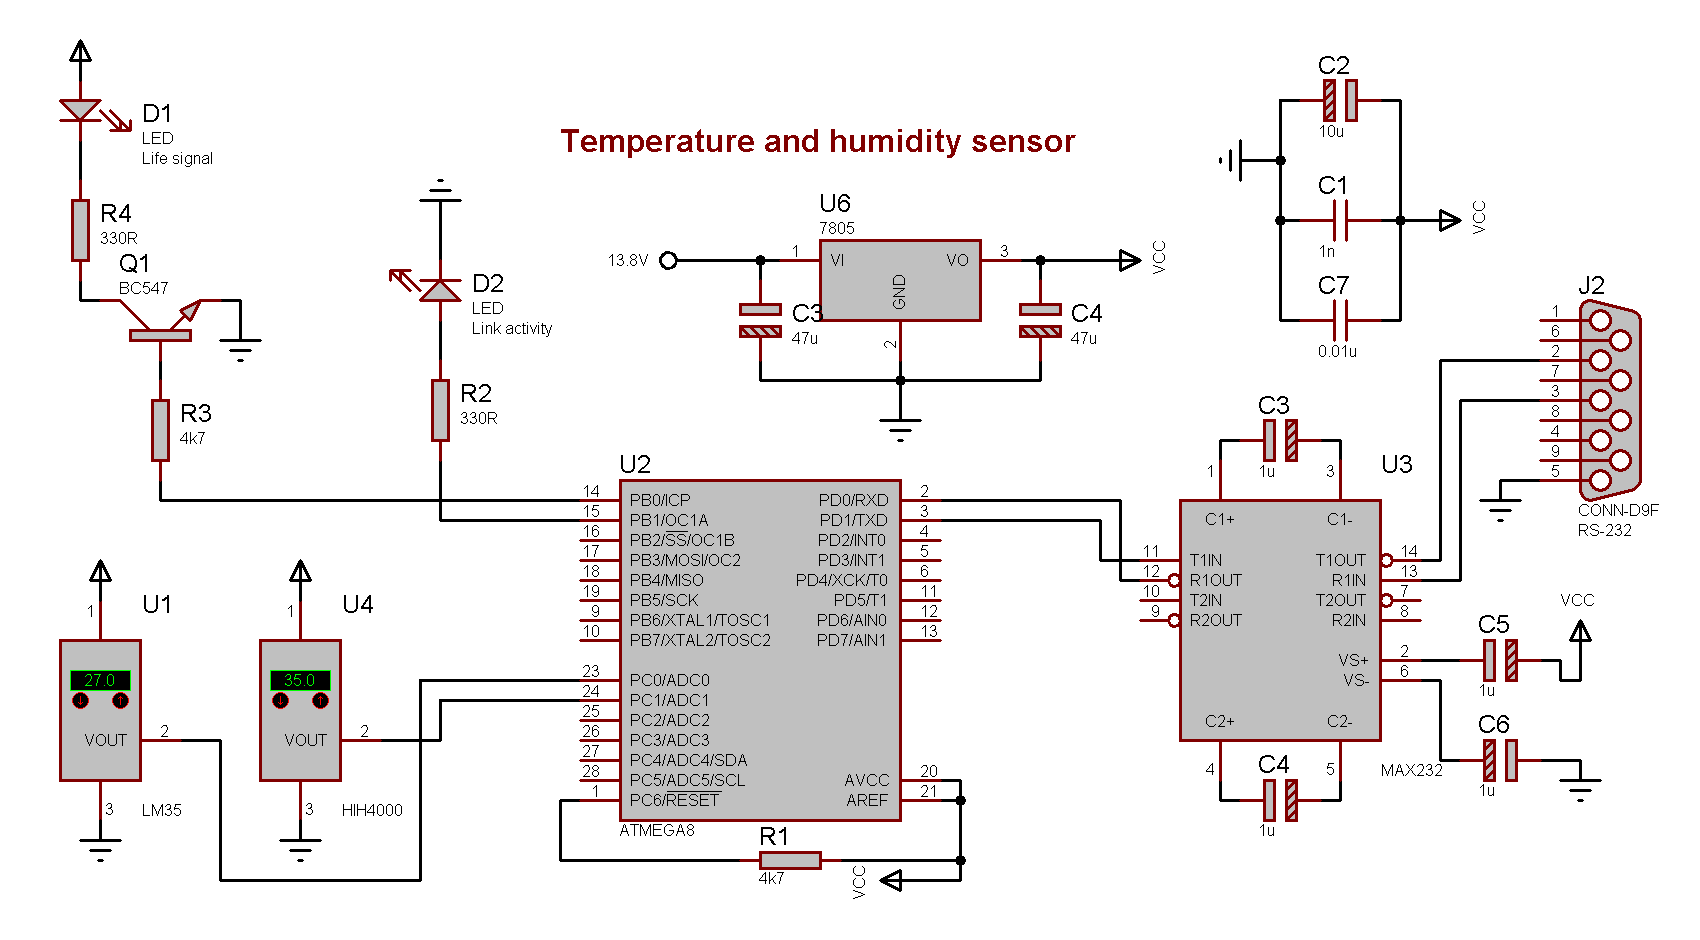 Schematic drawing for temperature and humidity sensor